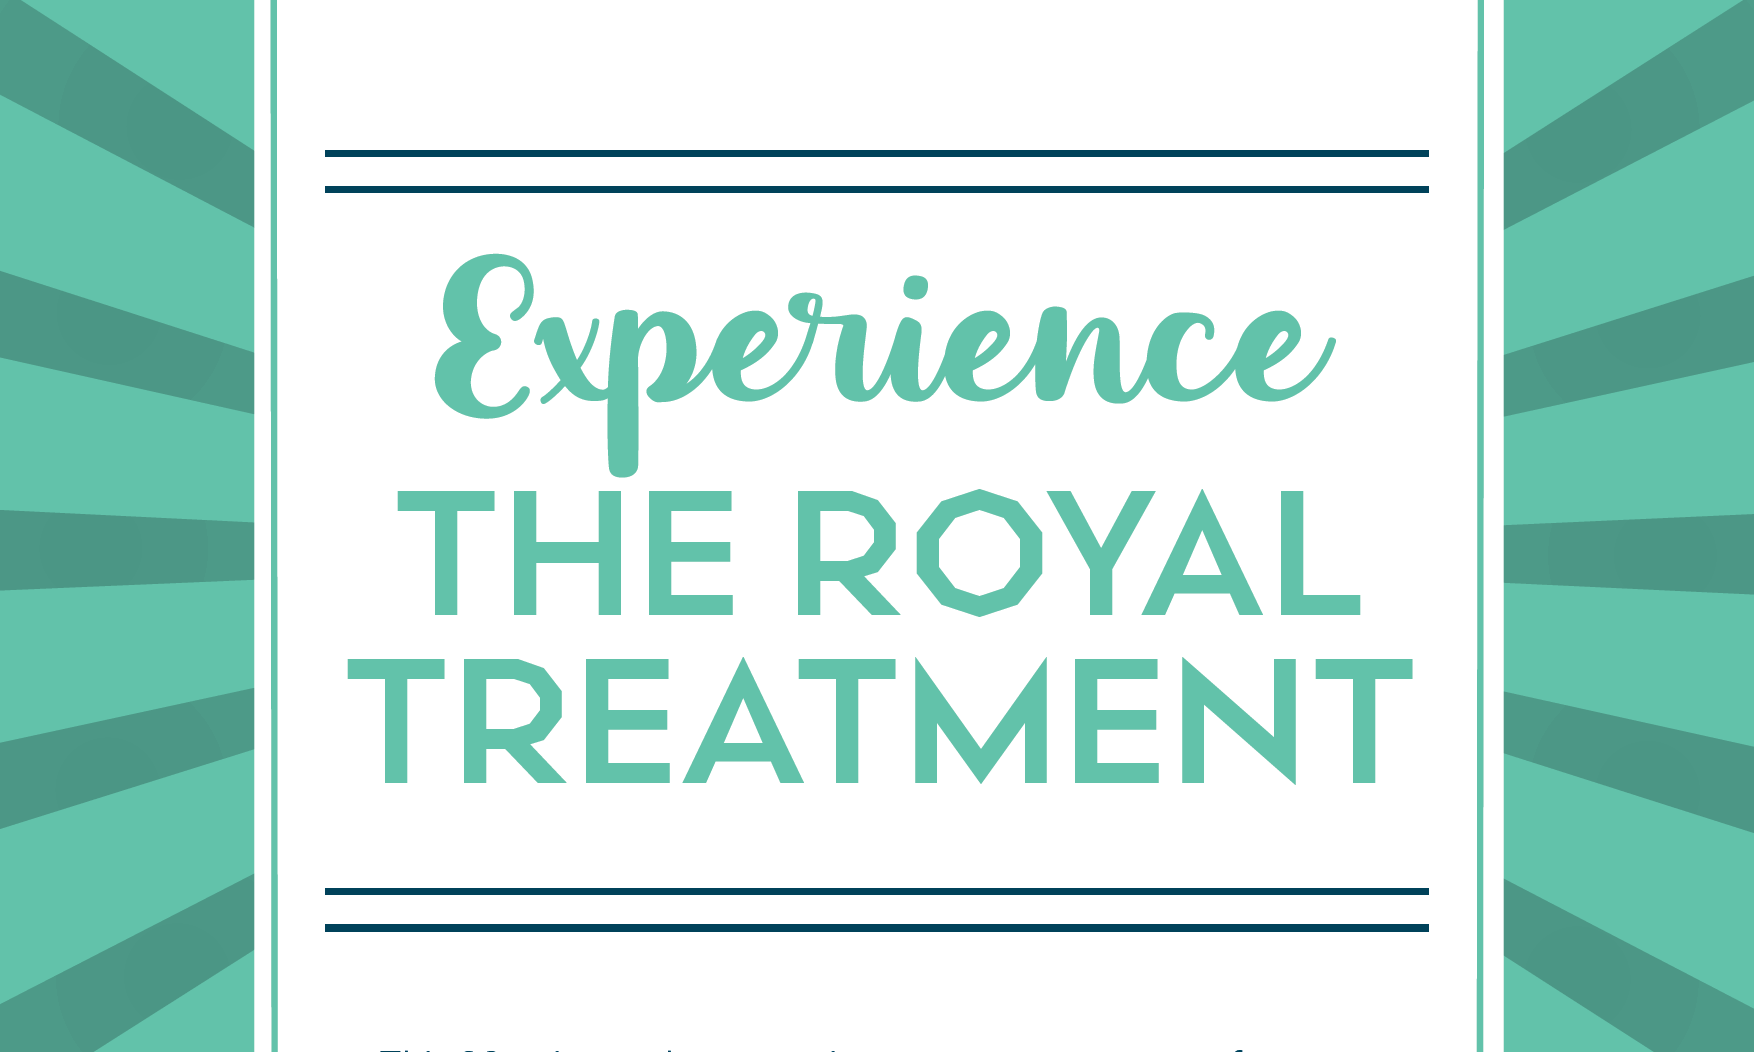 Experience the Royal Treatment